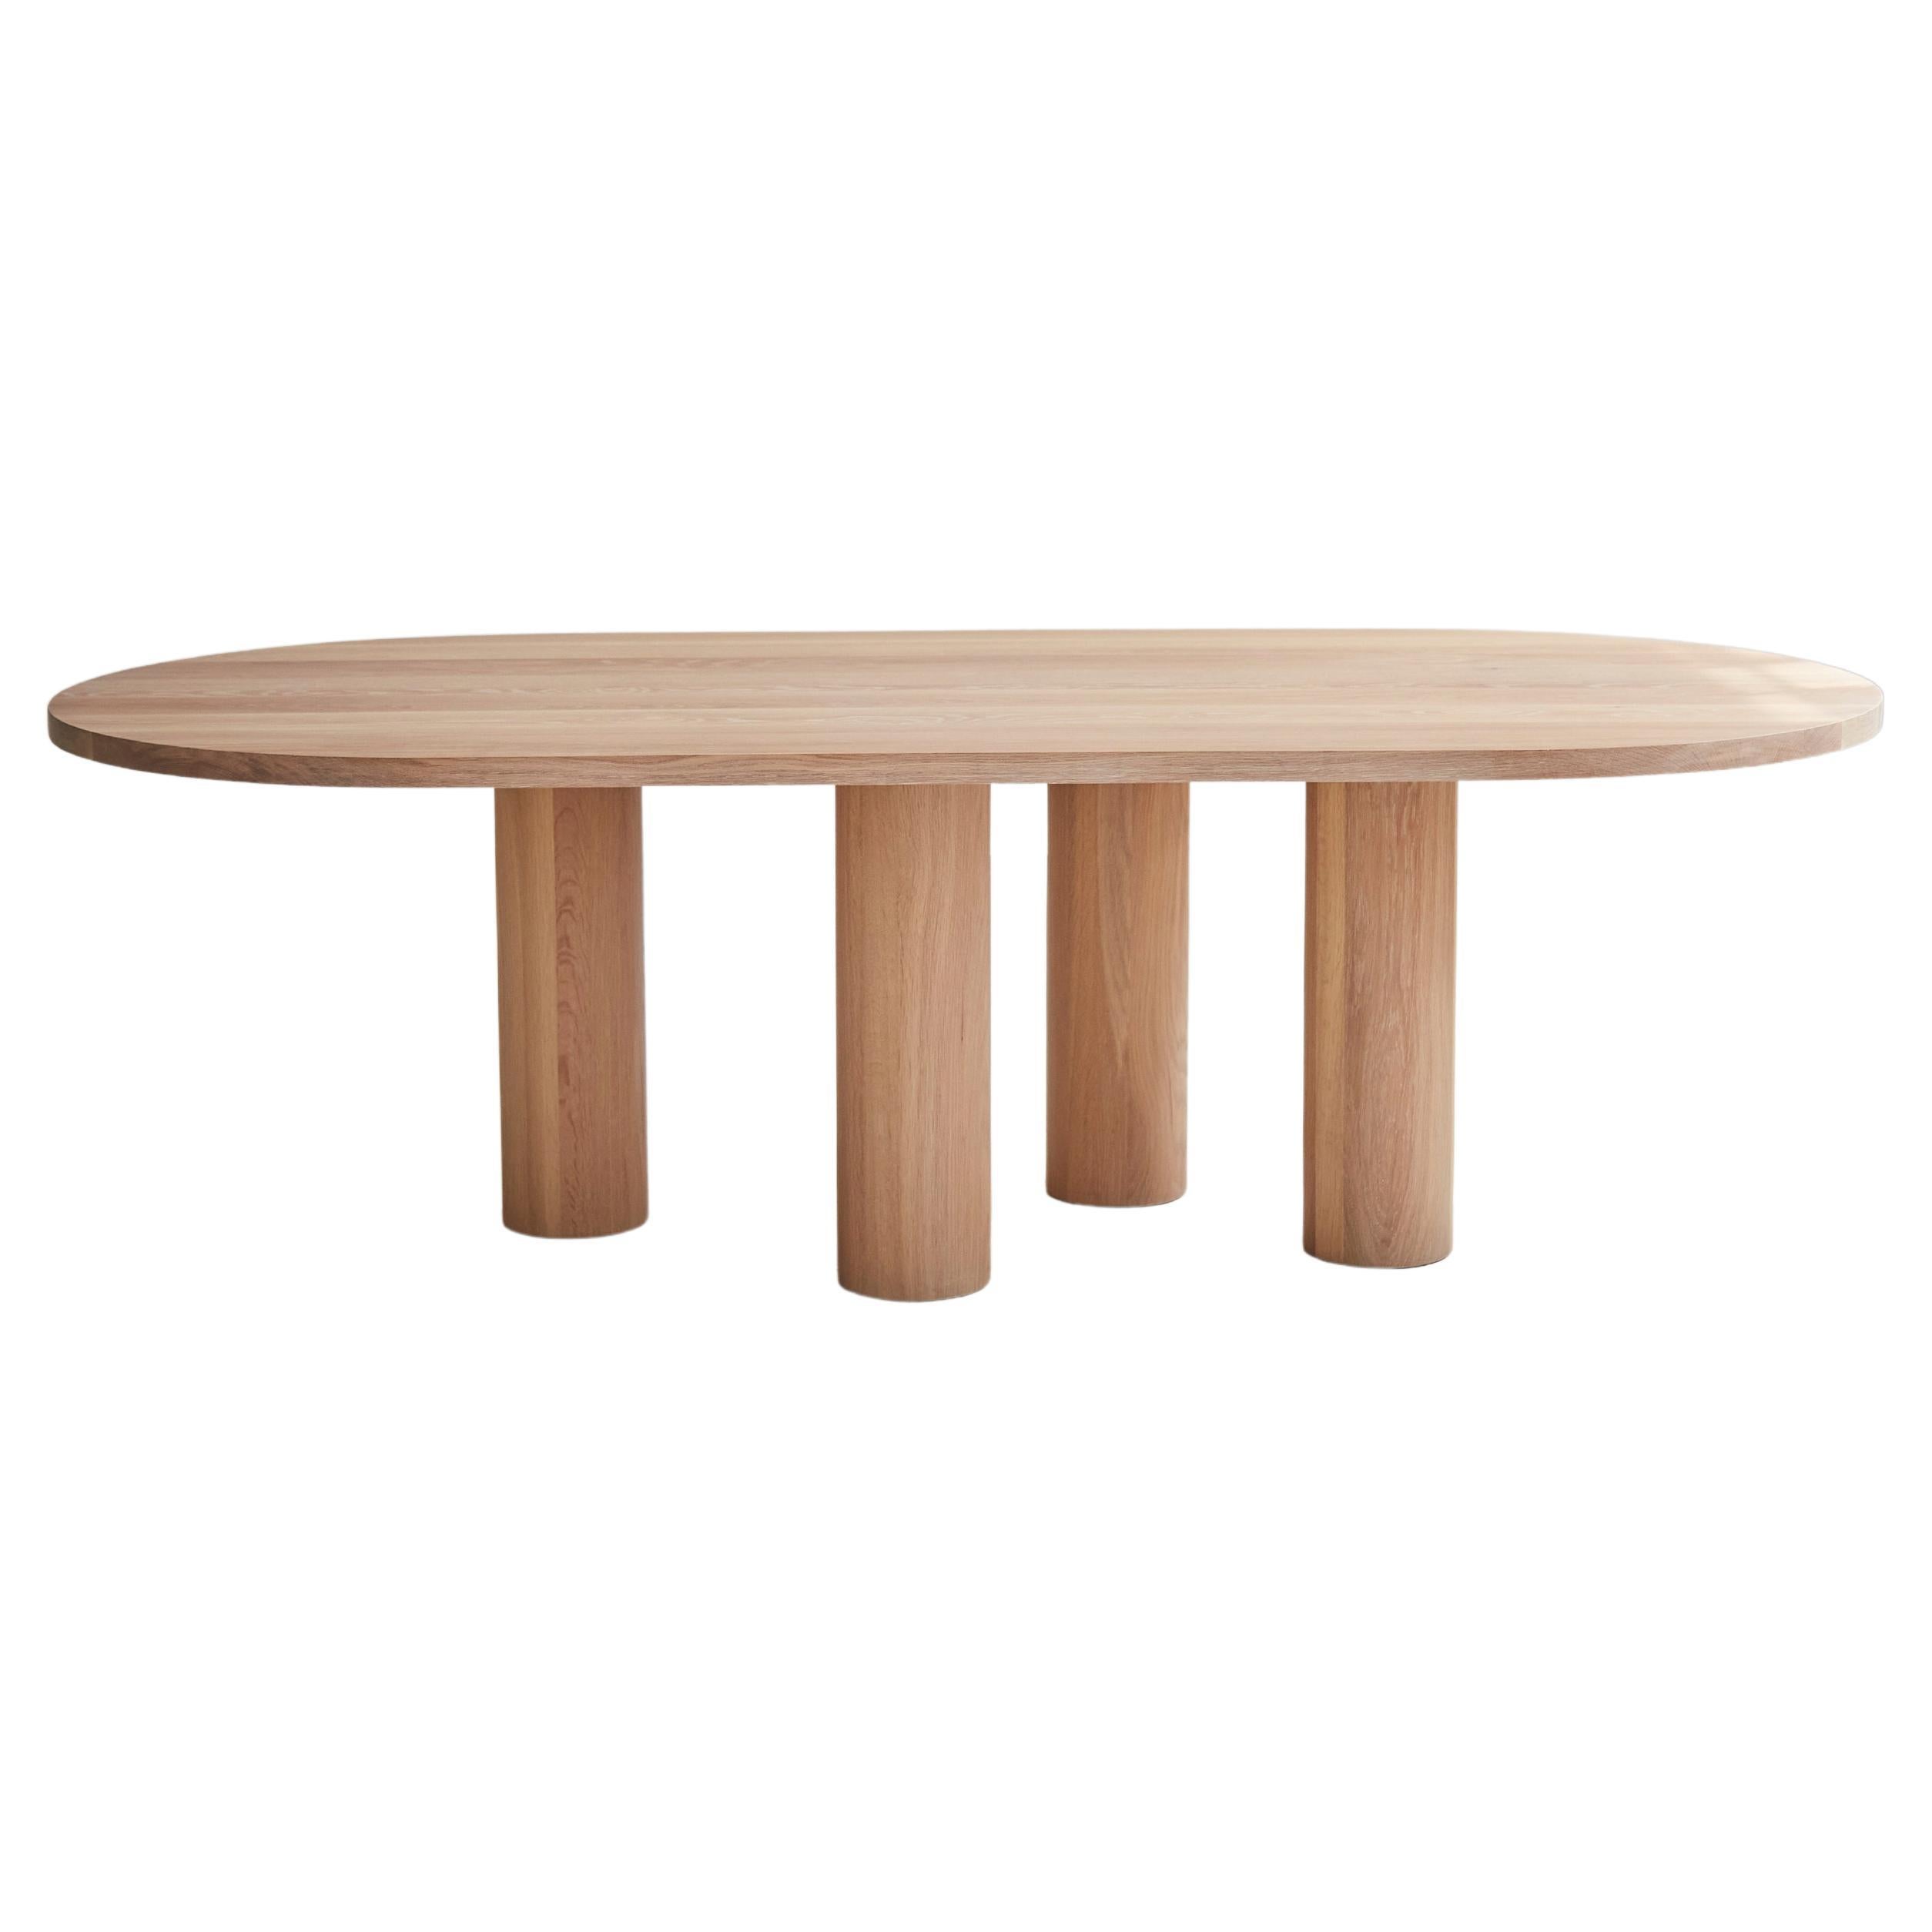 Mary Ratcliffe Tables